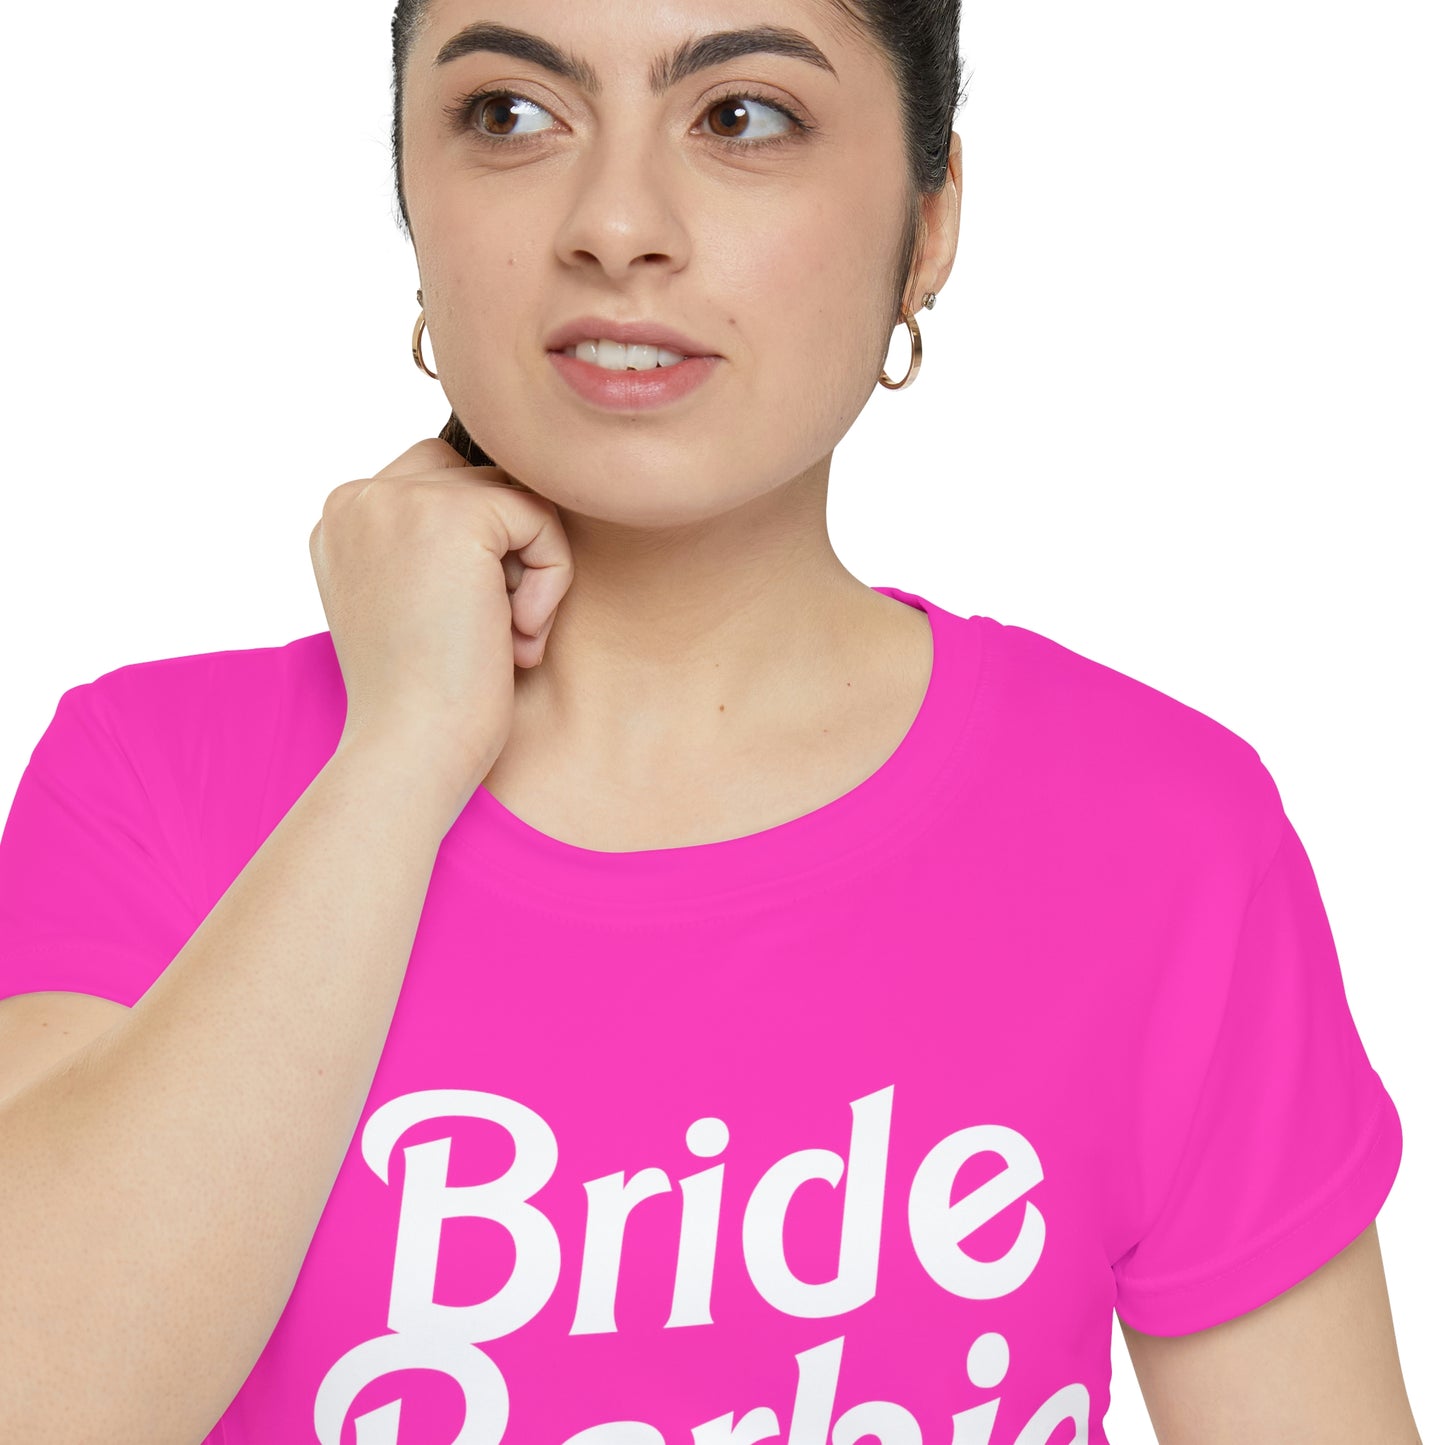 Bride Barbie, Bachelorette Party Shirts, Bridesmaid Gifts, Here comes the Party Tees, Group Party Favor Shirts, Bridal Party Shirt for women